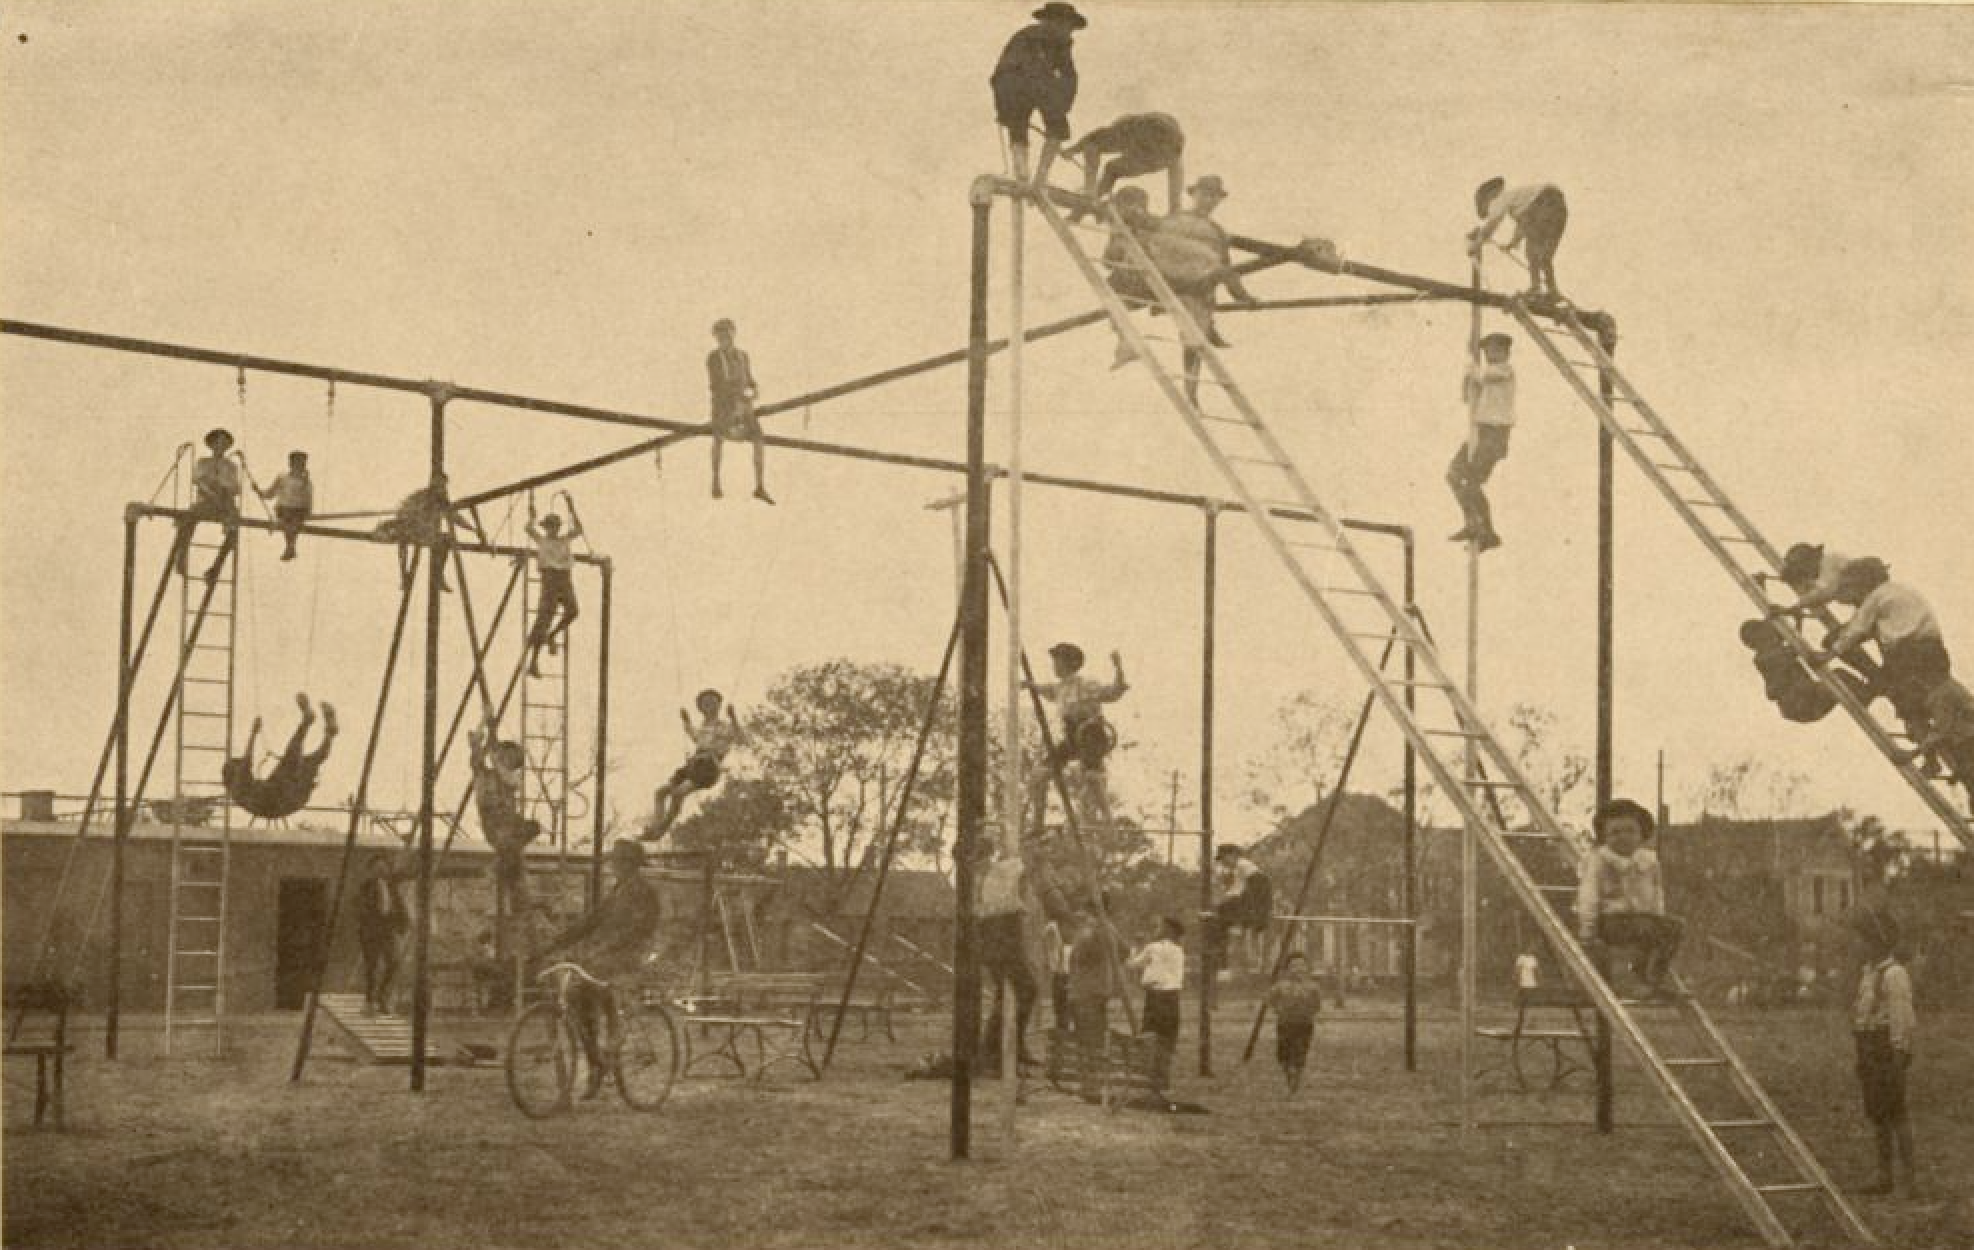 An old playground